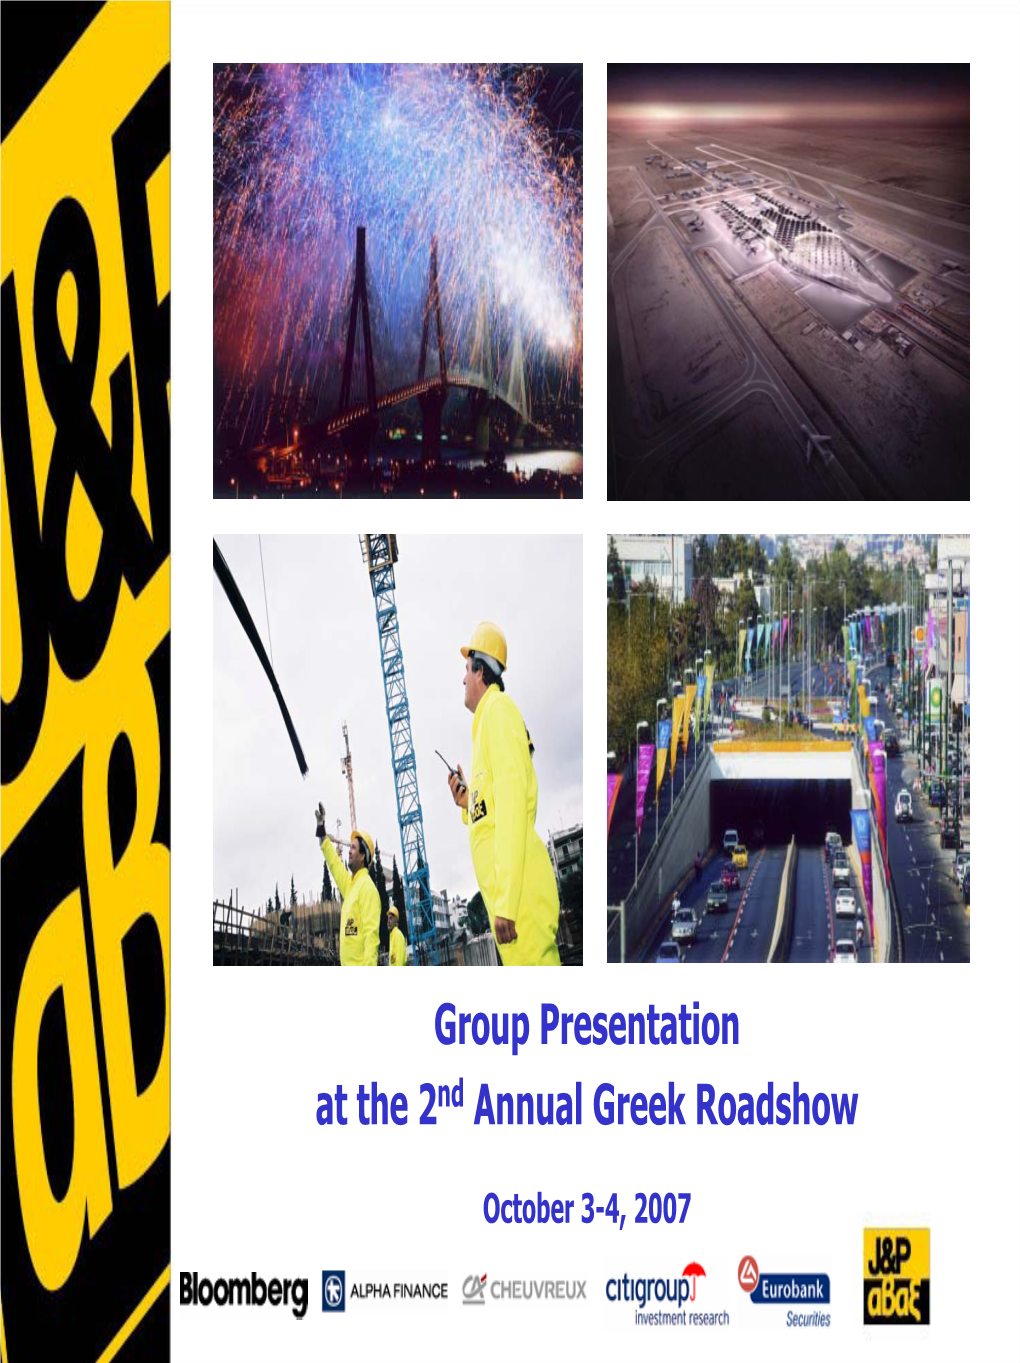 Group Presentation at the 2Nd Annual Greek Roadshow